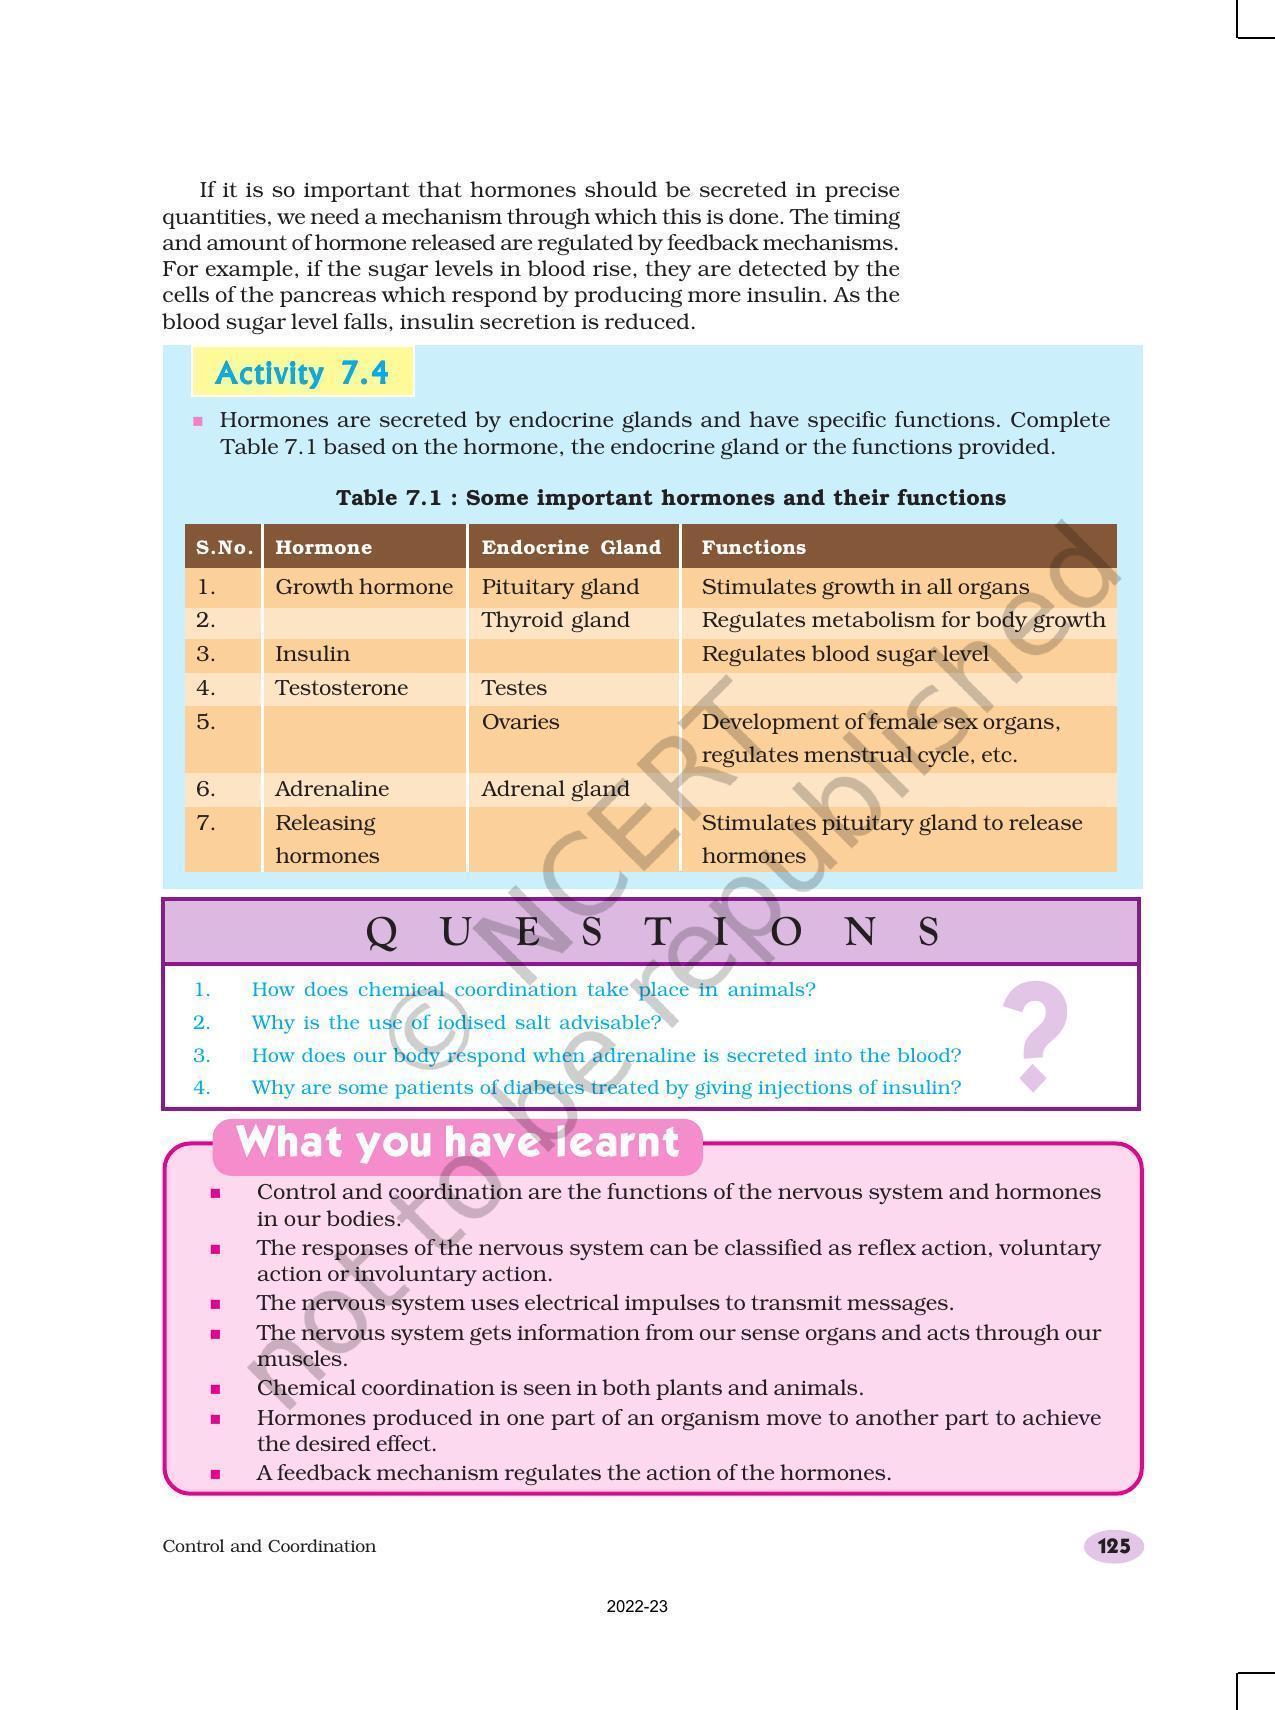 NCERT Book for Class 10 Science Chapter 7 Control and Coordination - Page 12